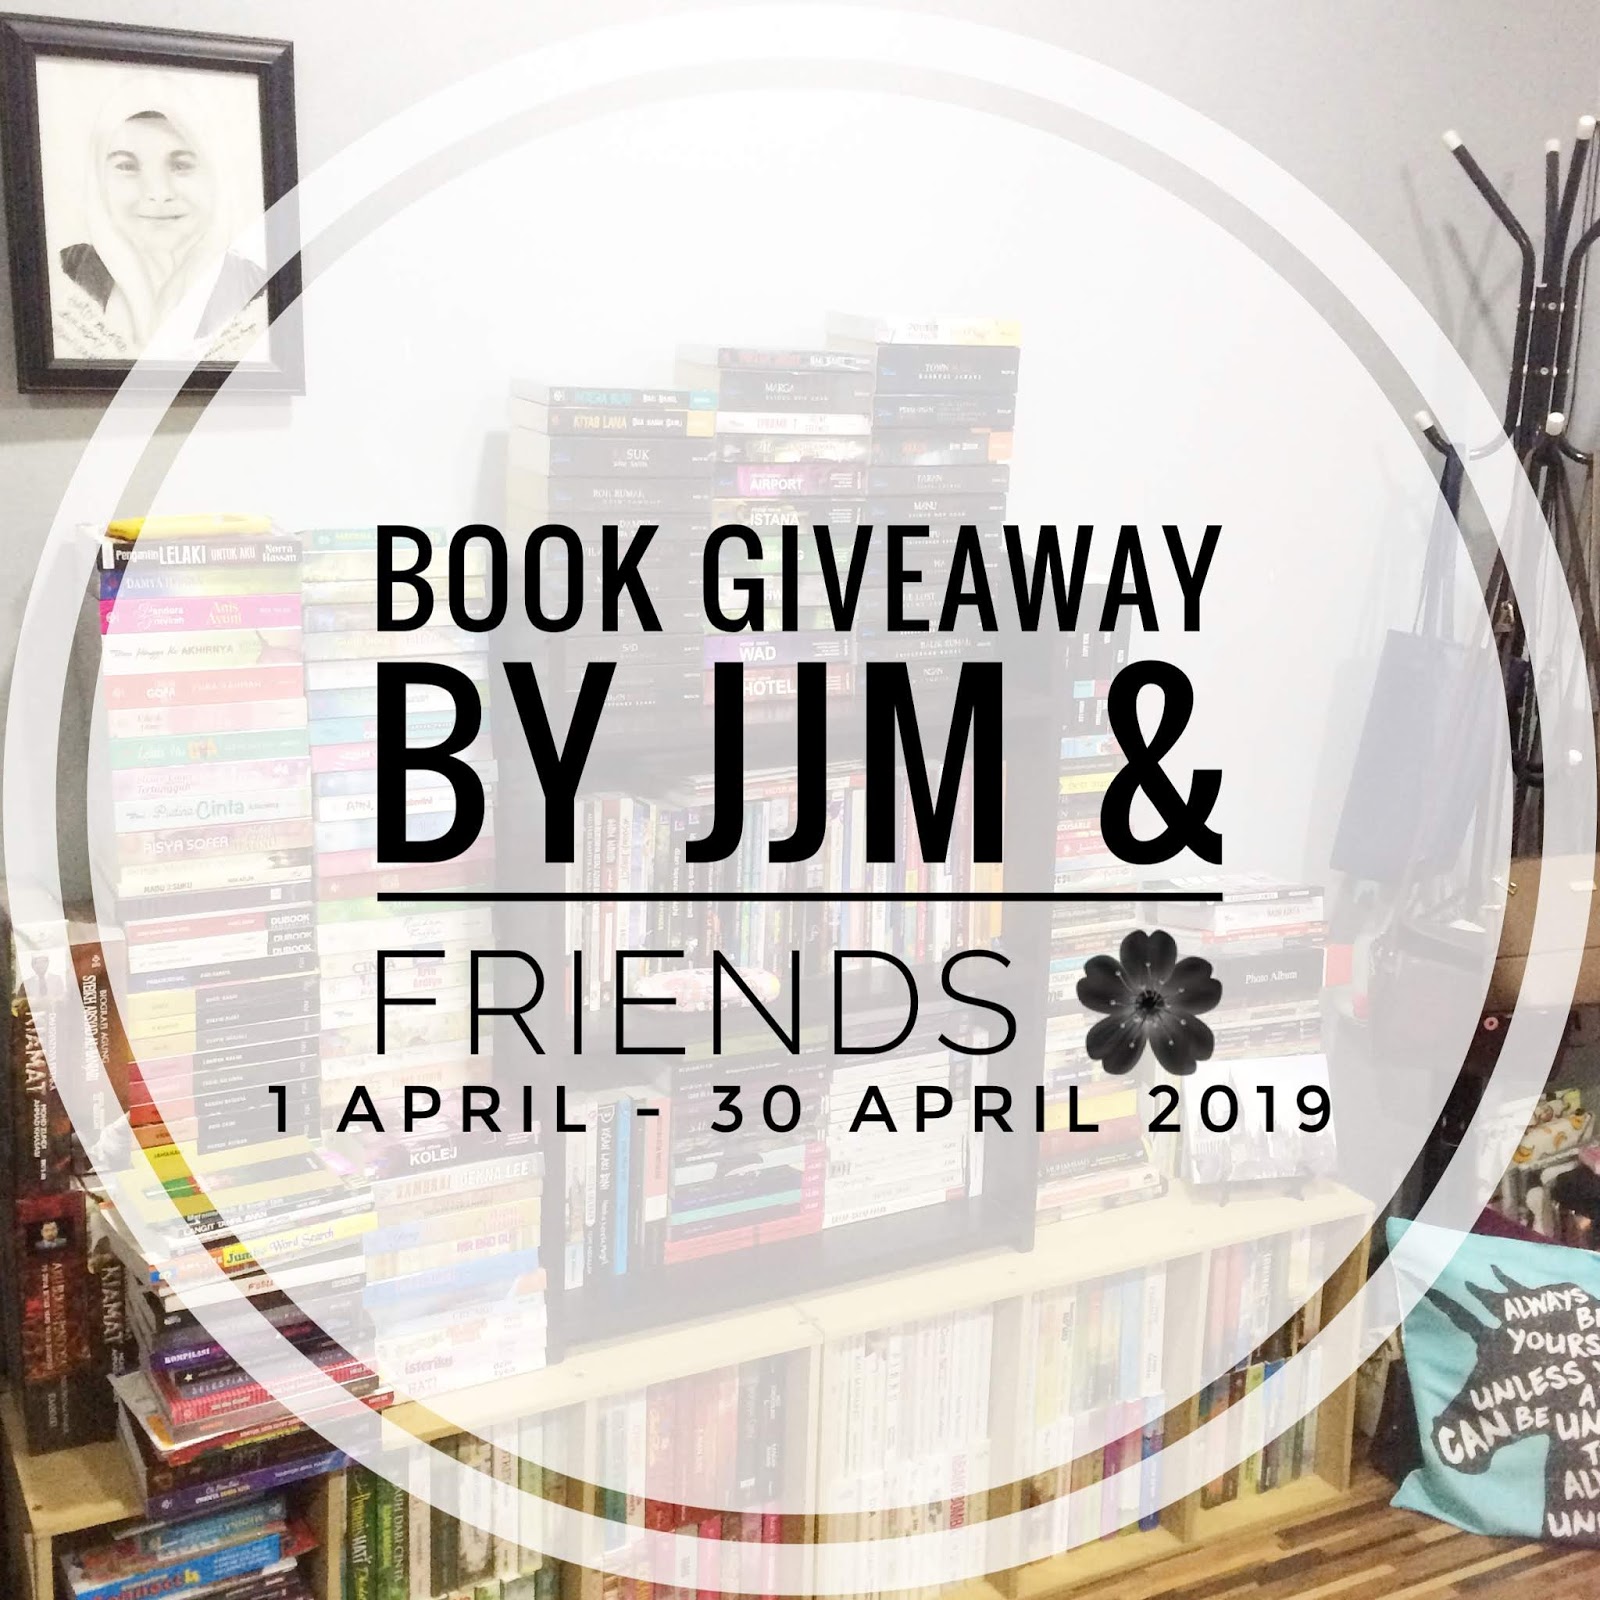 BOOK GIVEAWAY BY JJM & FRIENDS (CLOSED)